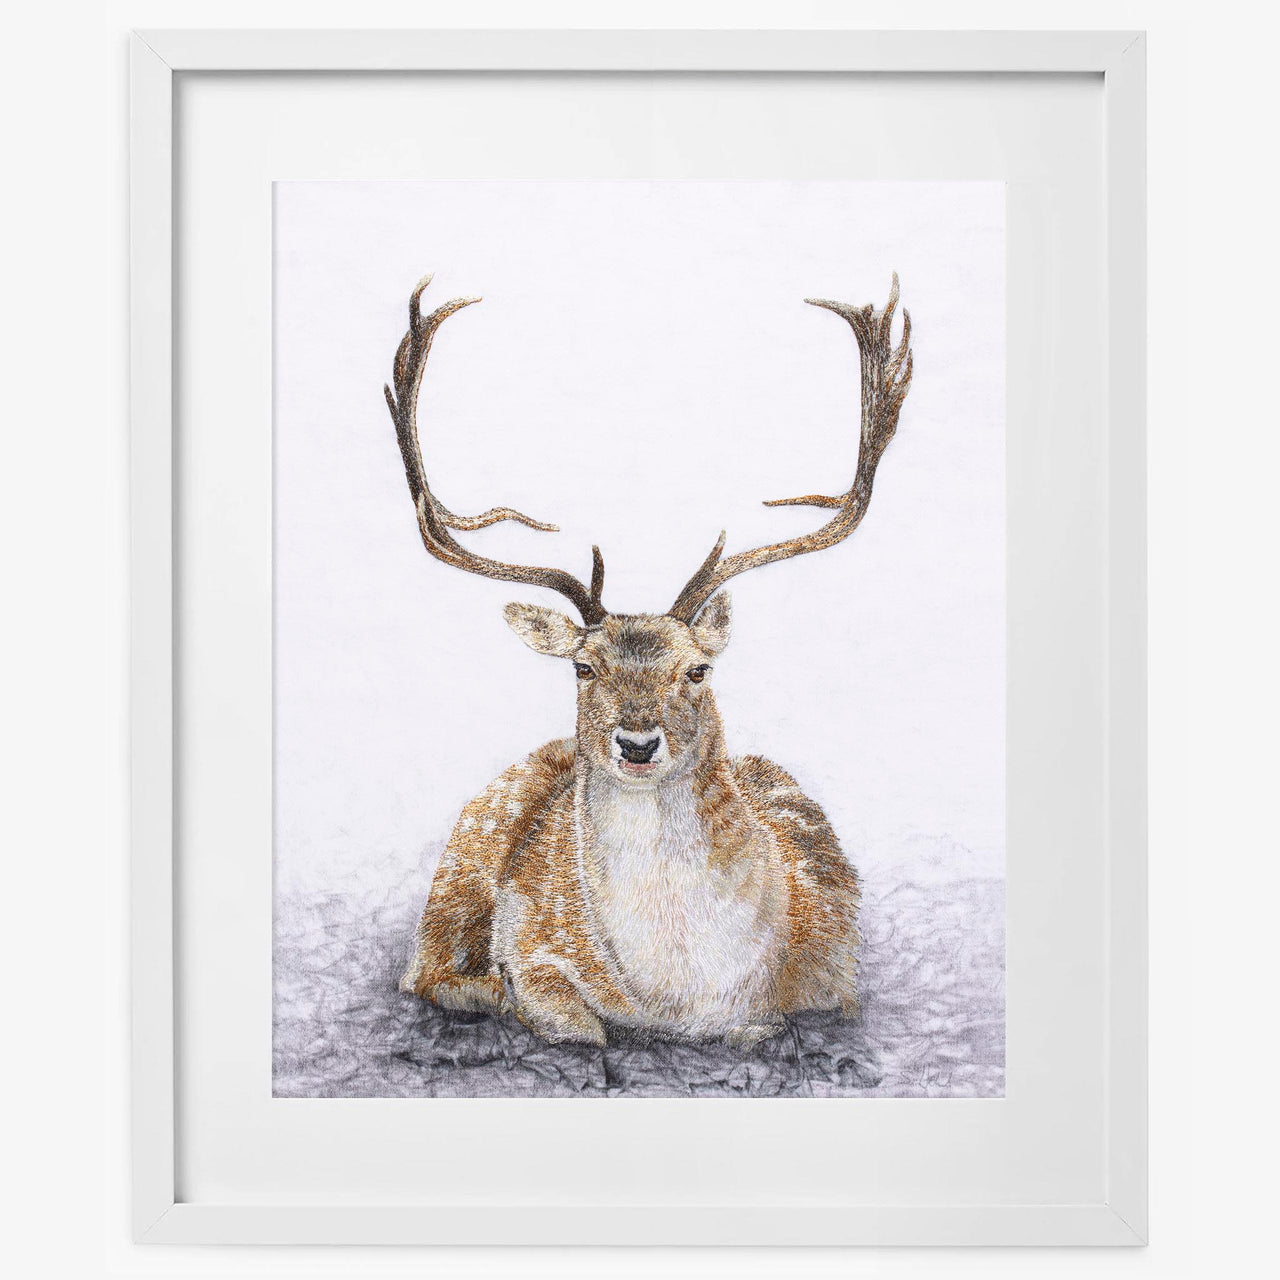 Hand embroidered siting deer limited edition print in white frame